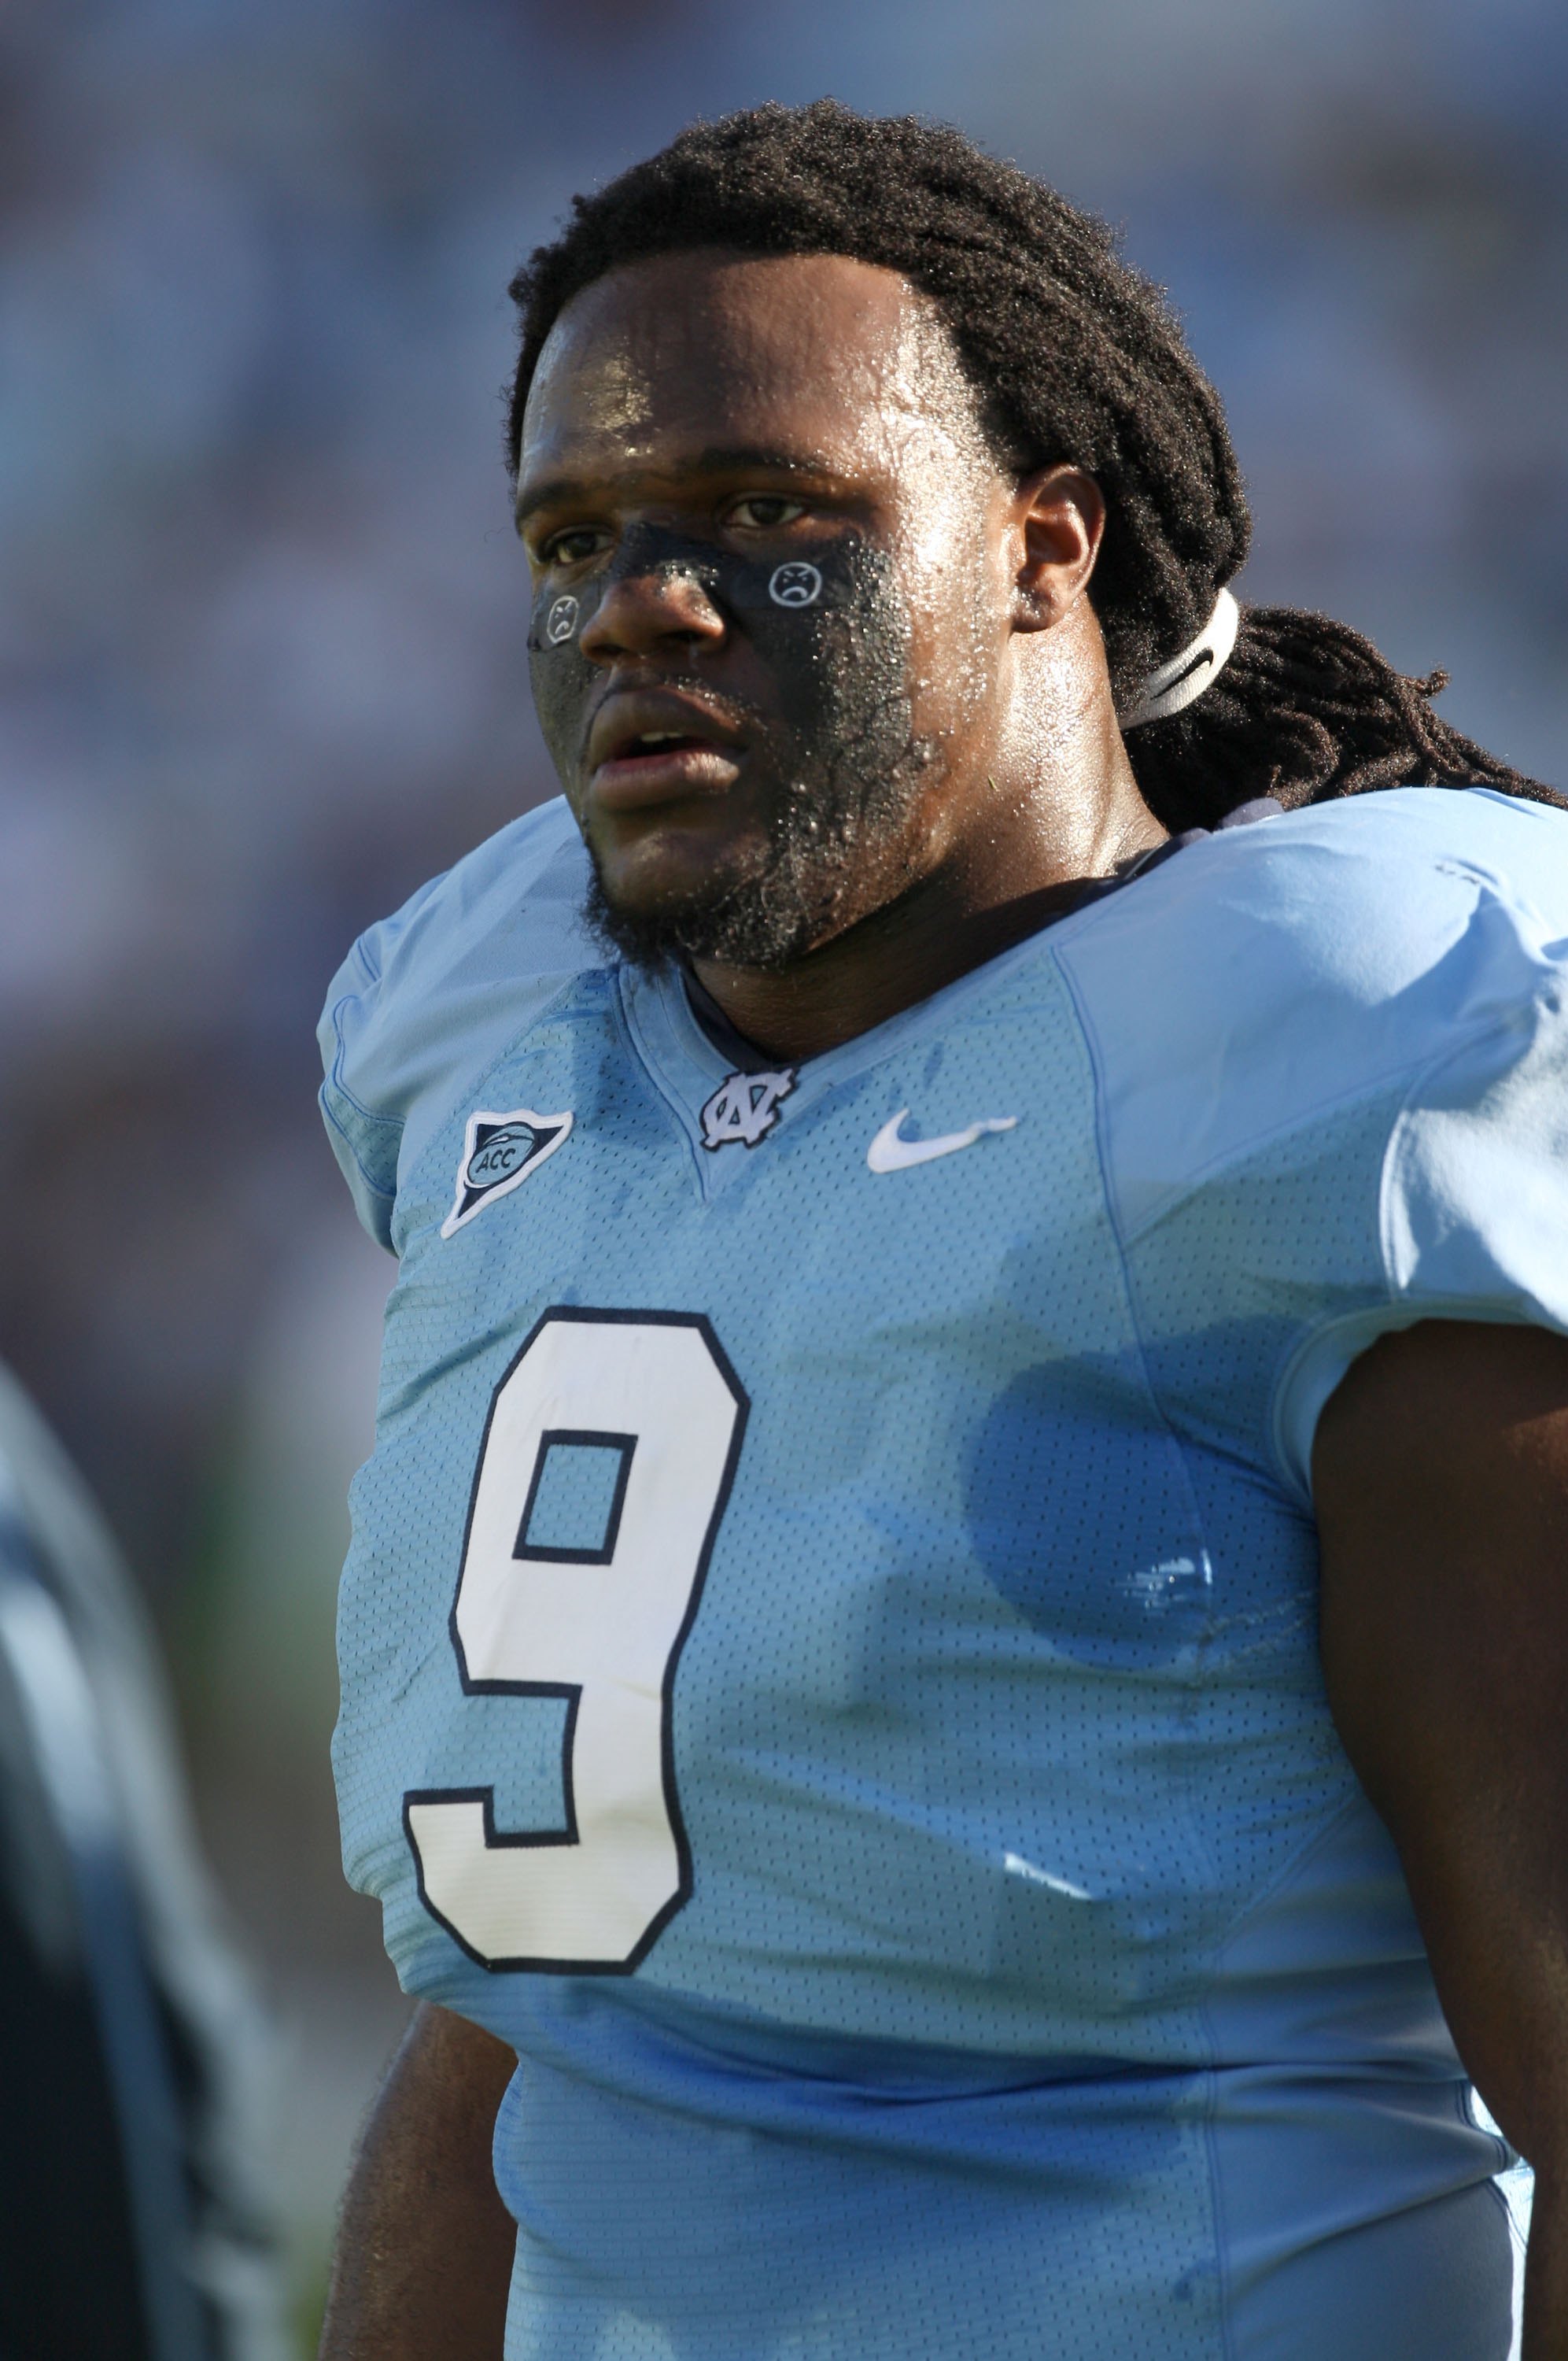 CHAPEL HILL, NC - NOVEMBER 7:  Marvin Austin #9 of the North Carolina Tar Heels looks on during the game against the Duke Blue Devils at Kenan Stadium on November 7, 2009 in Chapel Hill, North Carolina. (Photo by Streeter Lecka/Getty Images)